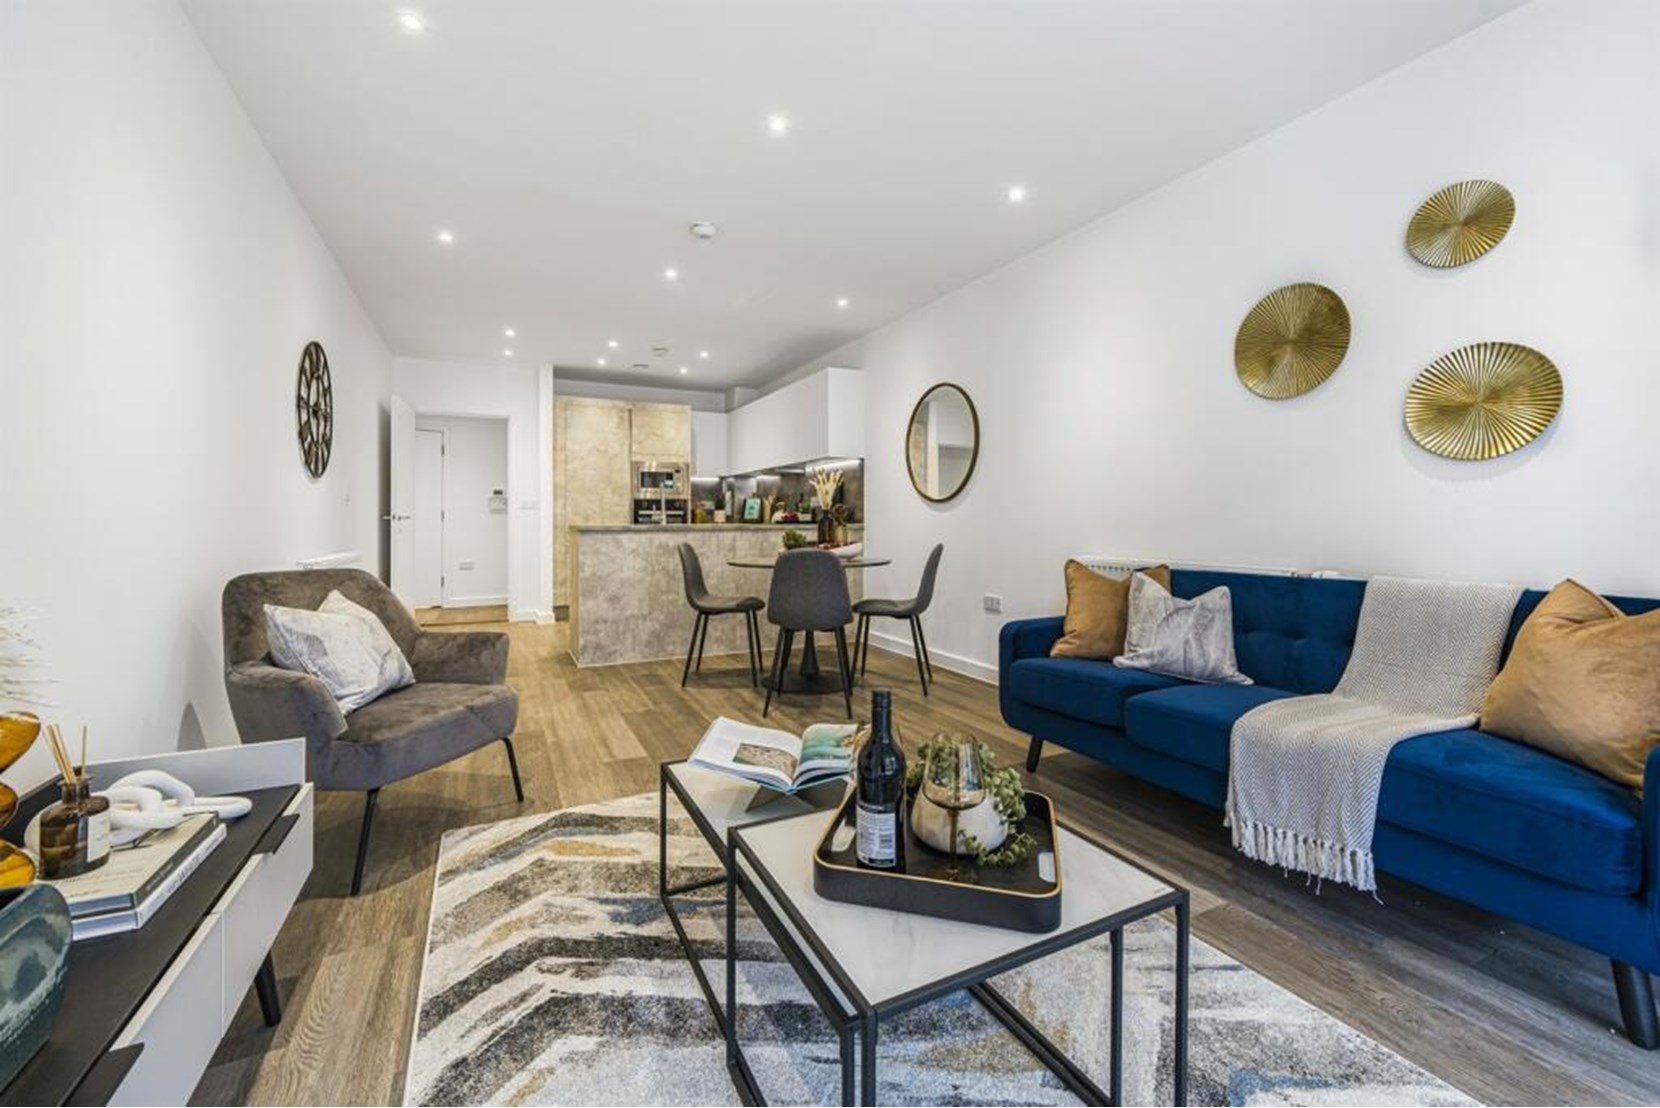 Apartments to Rent by Simple Life London in Elements, Enfield, EN3, The Copper kitchen living dining area